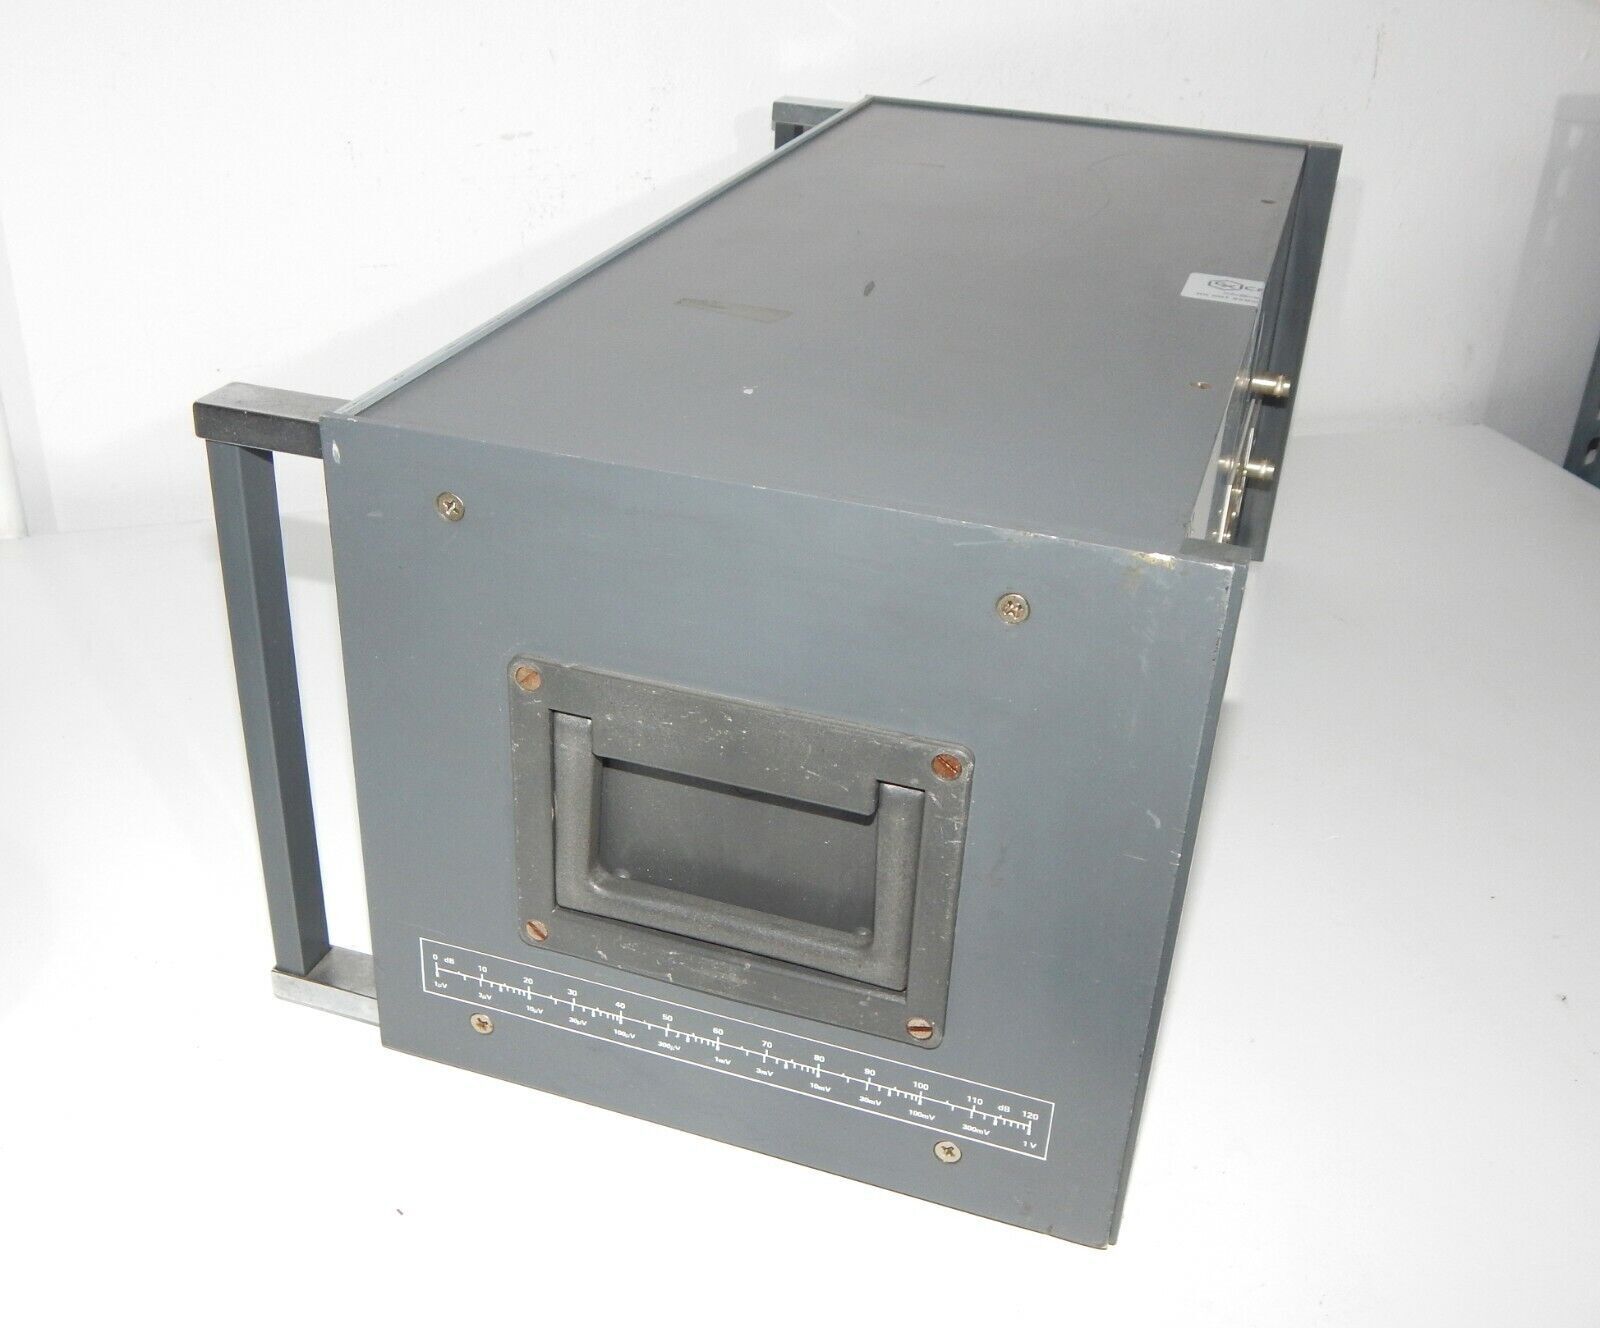 used Longest wave interference measurement receiver LSME 1530 A 1530A CISPR 3...